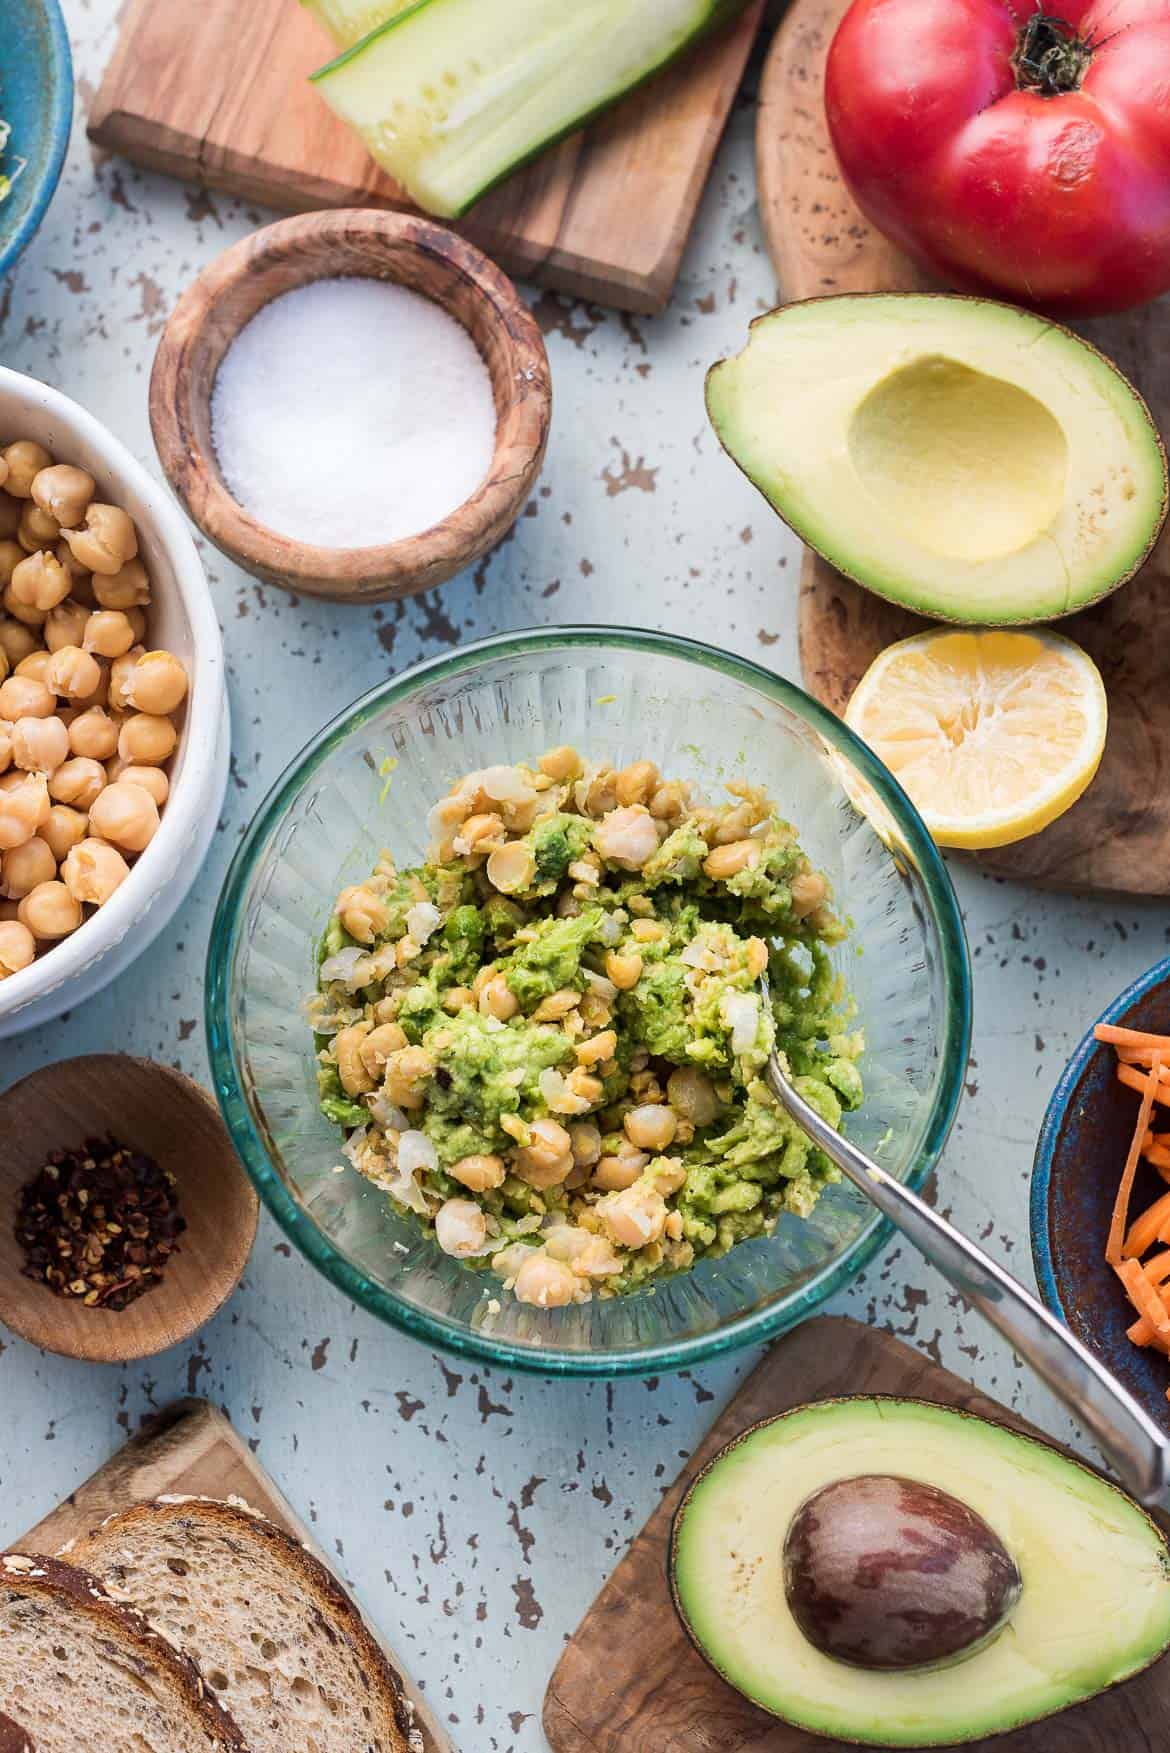 Smashed avocados and chickpeas in a clear bowl.